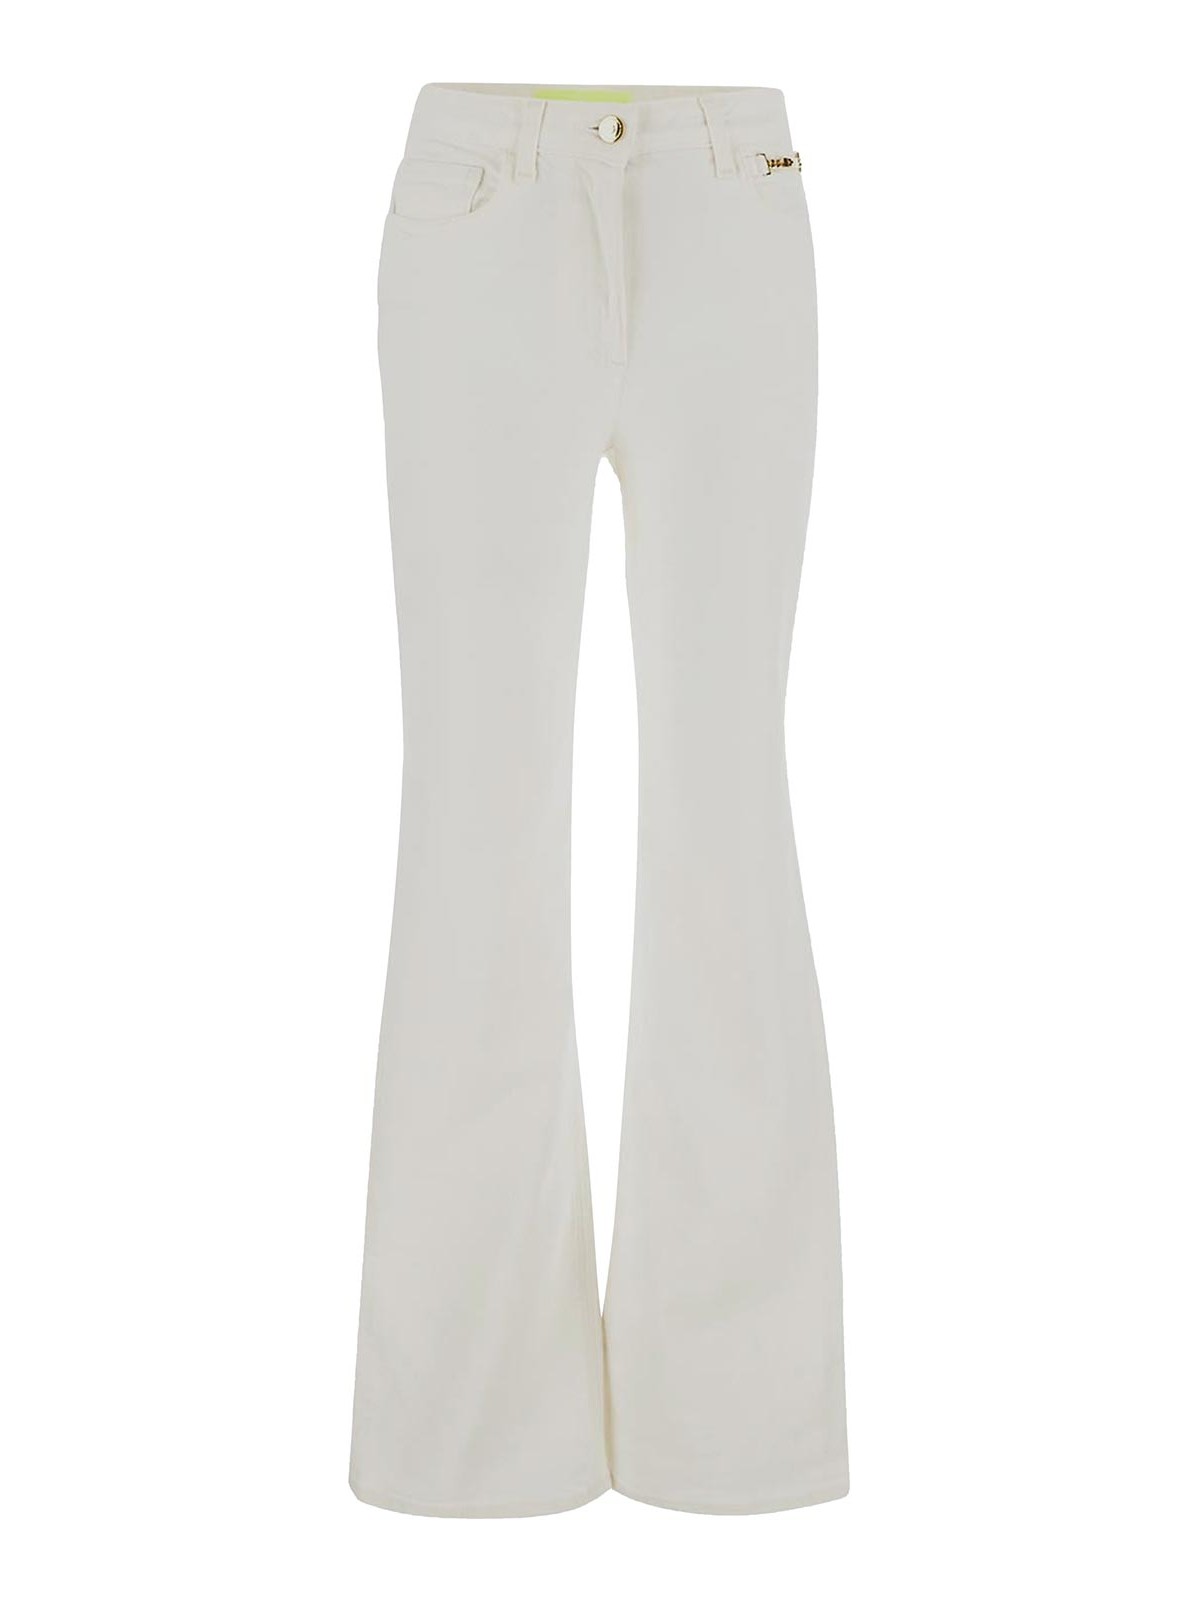 ELISABETTA FRANCHI WHITE JEANS WITH SIDE POCKETS